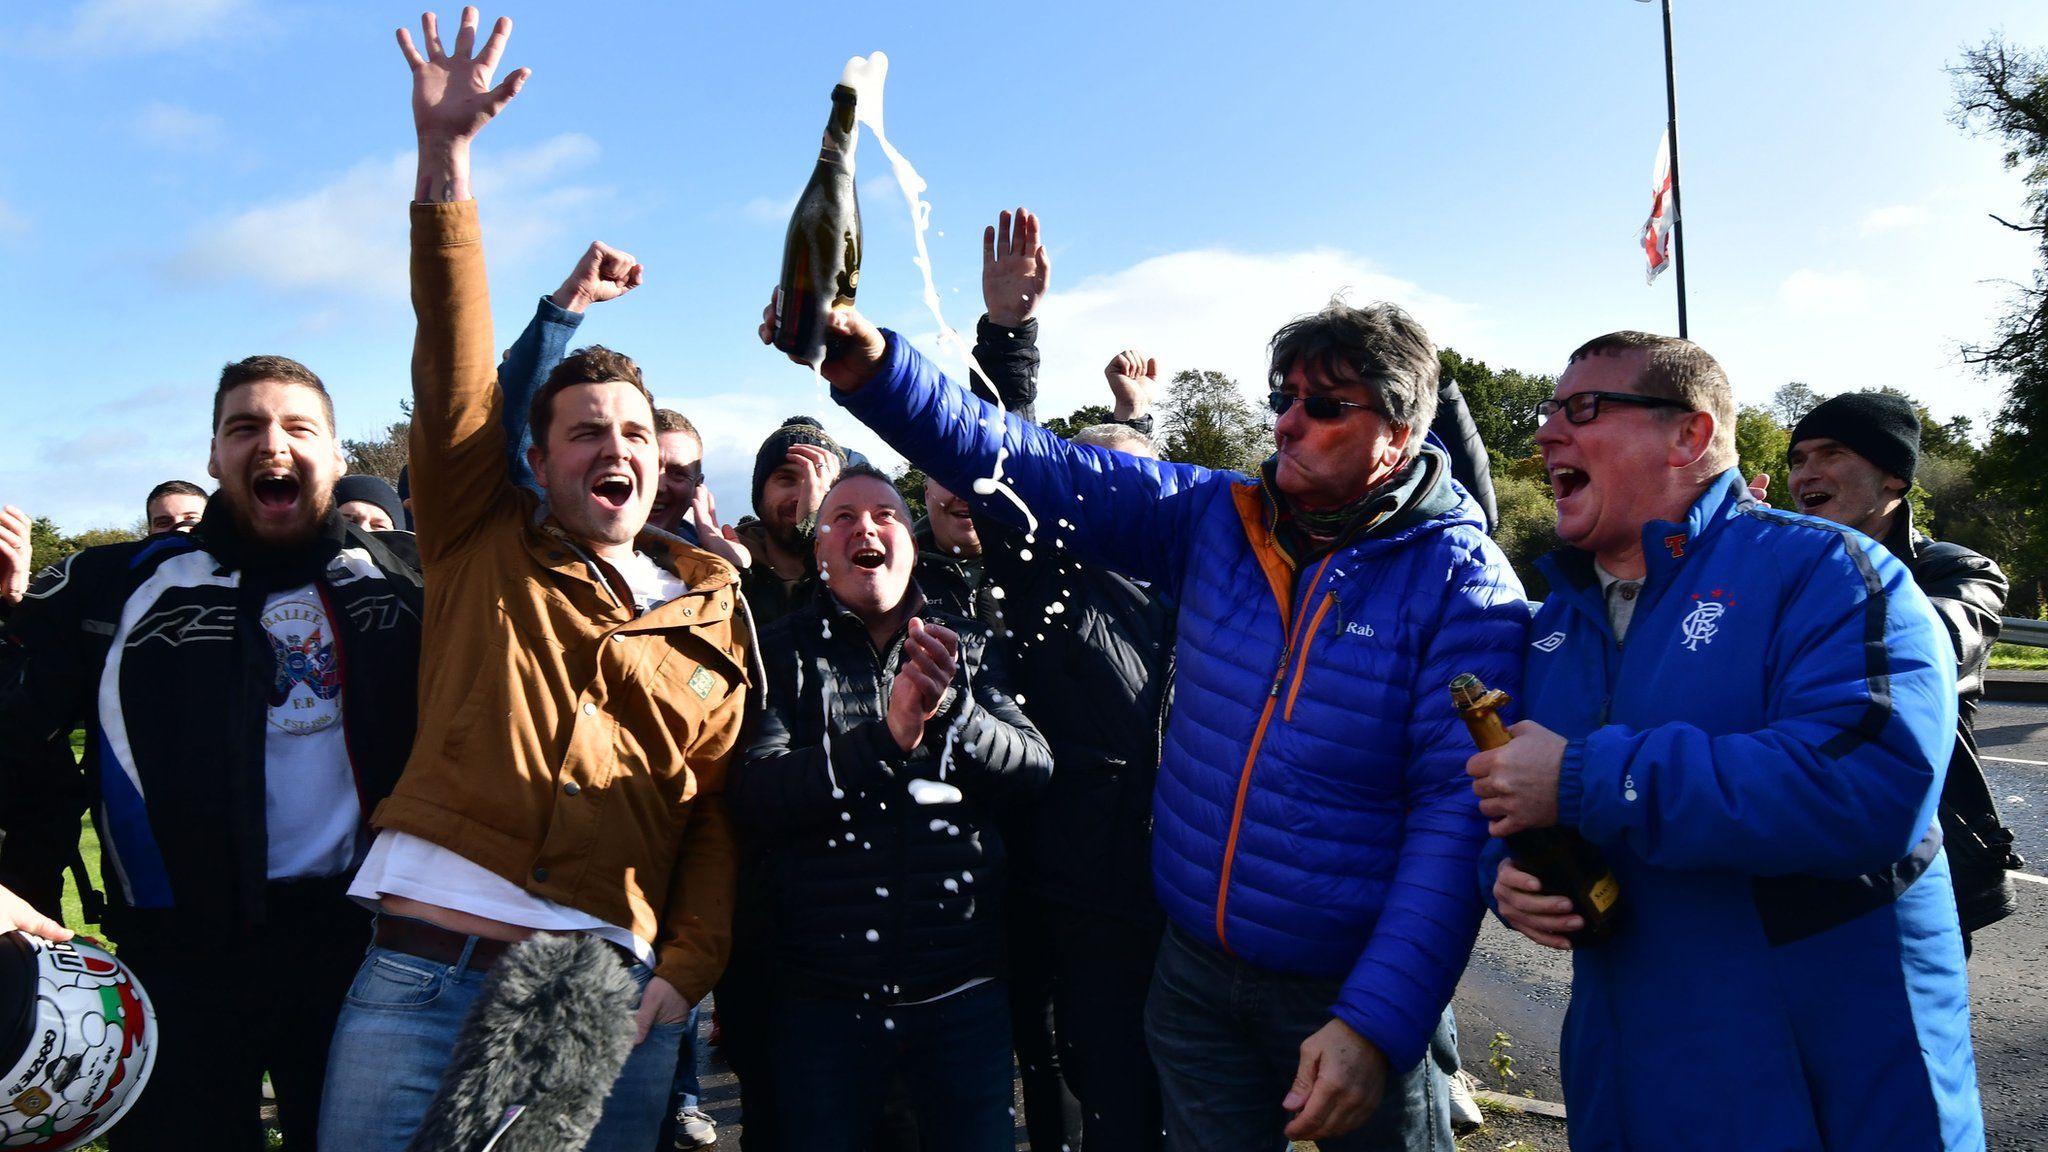 Wrightbus workers celebrate with a bottle of champagne outside the factory